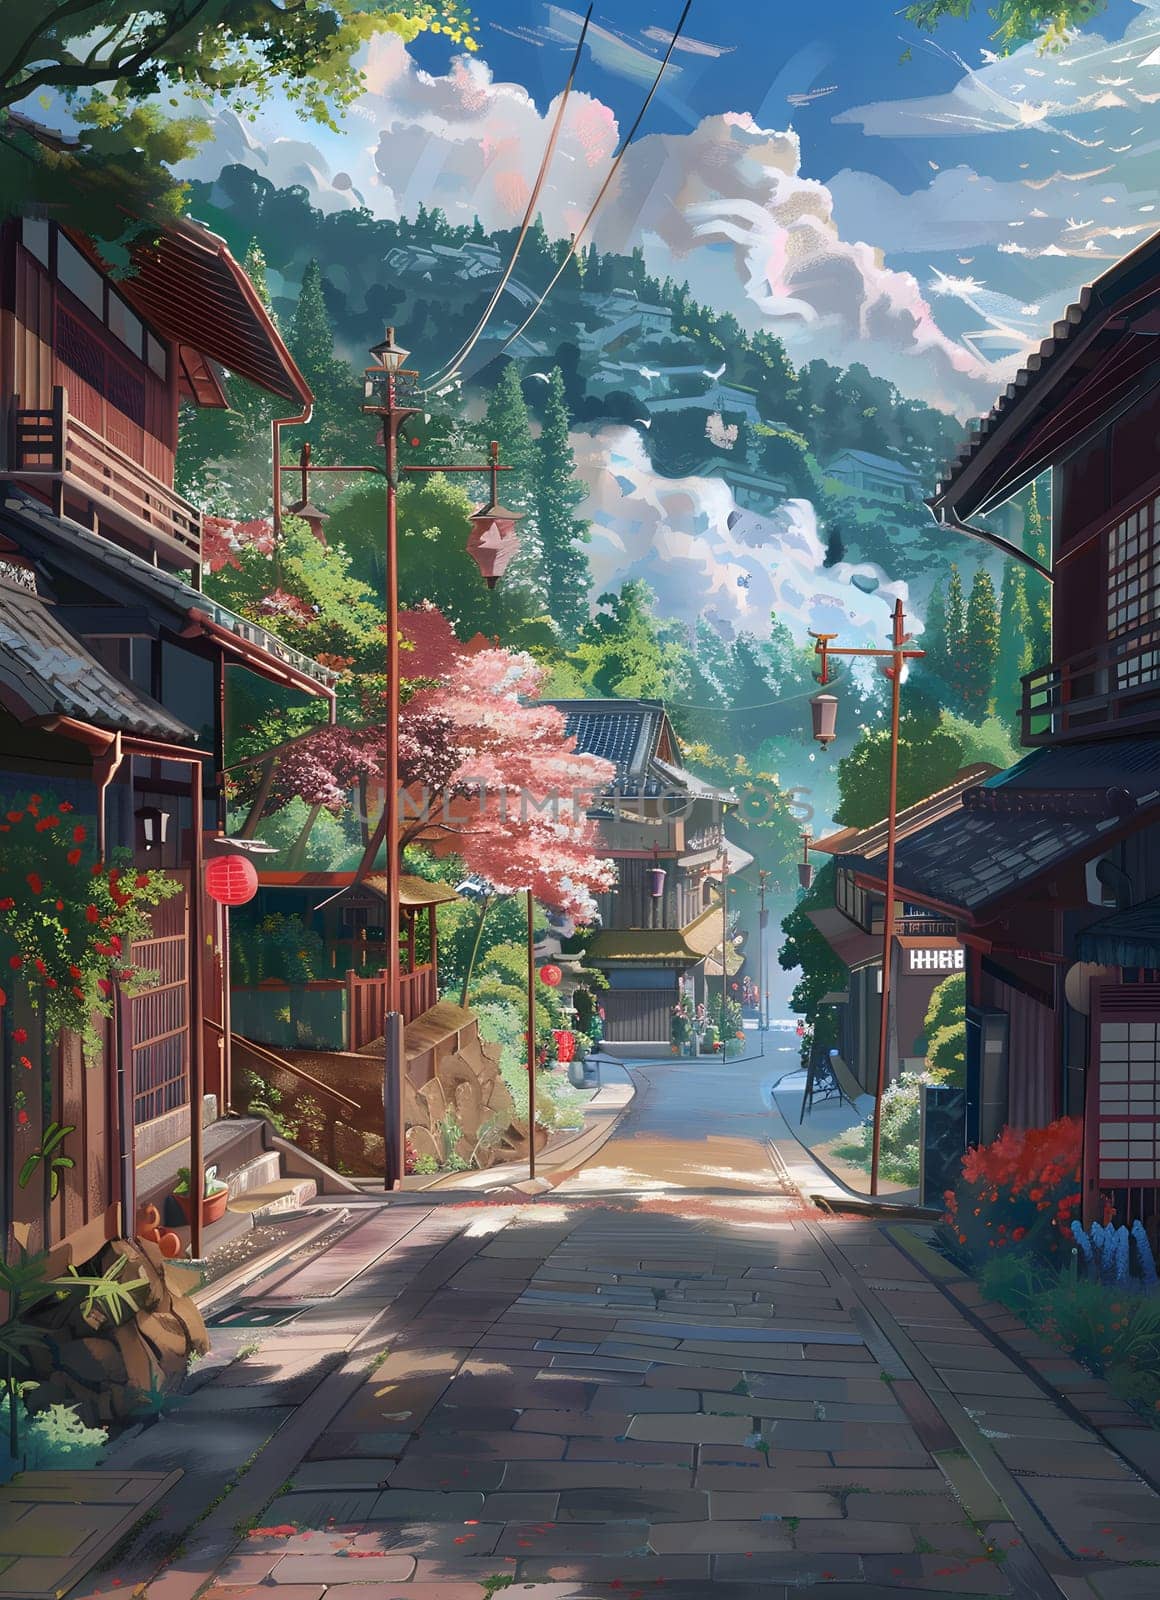 An art piece depicting a scenic narrow street with buildings, trees, and an asphalt road surface. A beautiful natural landscape captured in paint